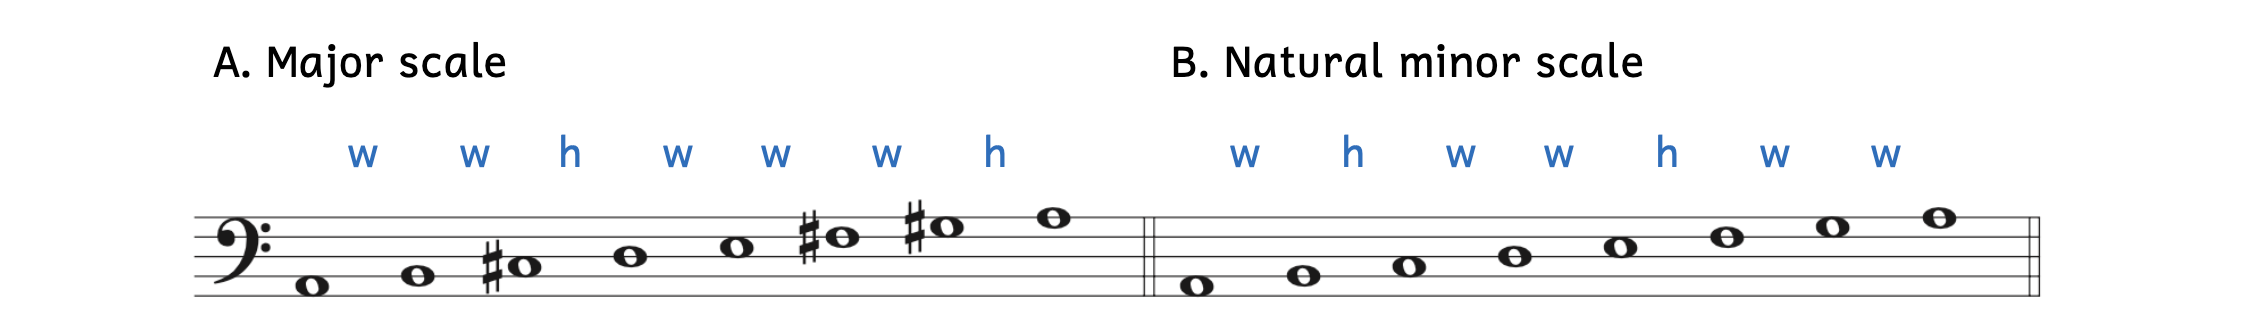 Example A shows an ascending major scale beginning on A2 using the sequence of whole steps and half steps: whole-whole-half-whole-whole-whole-half. Example B shows an ascending natural minor scale beginning on A2 using the sequence of whole steps and half steps: whole-half-whole-whole-half-whole-whole.